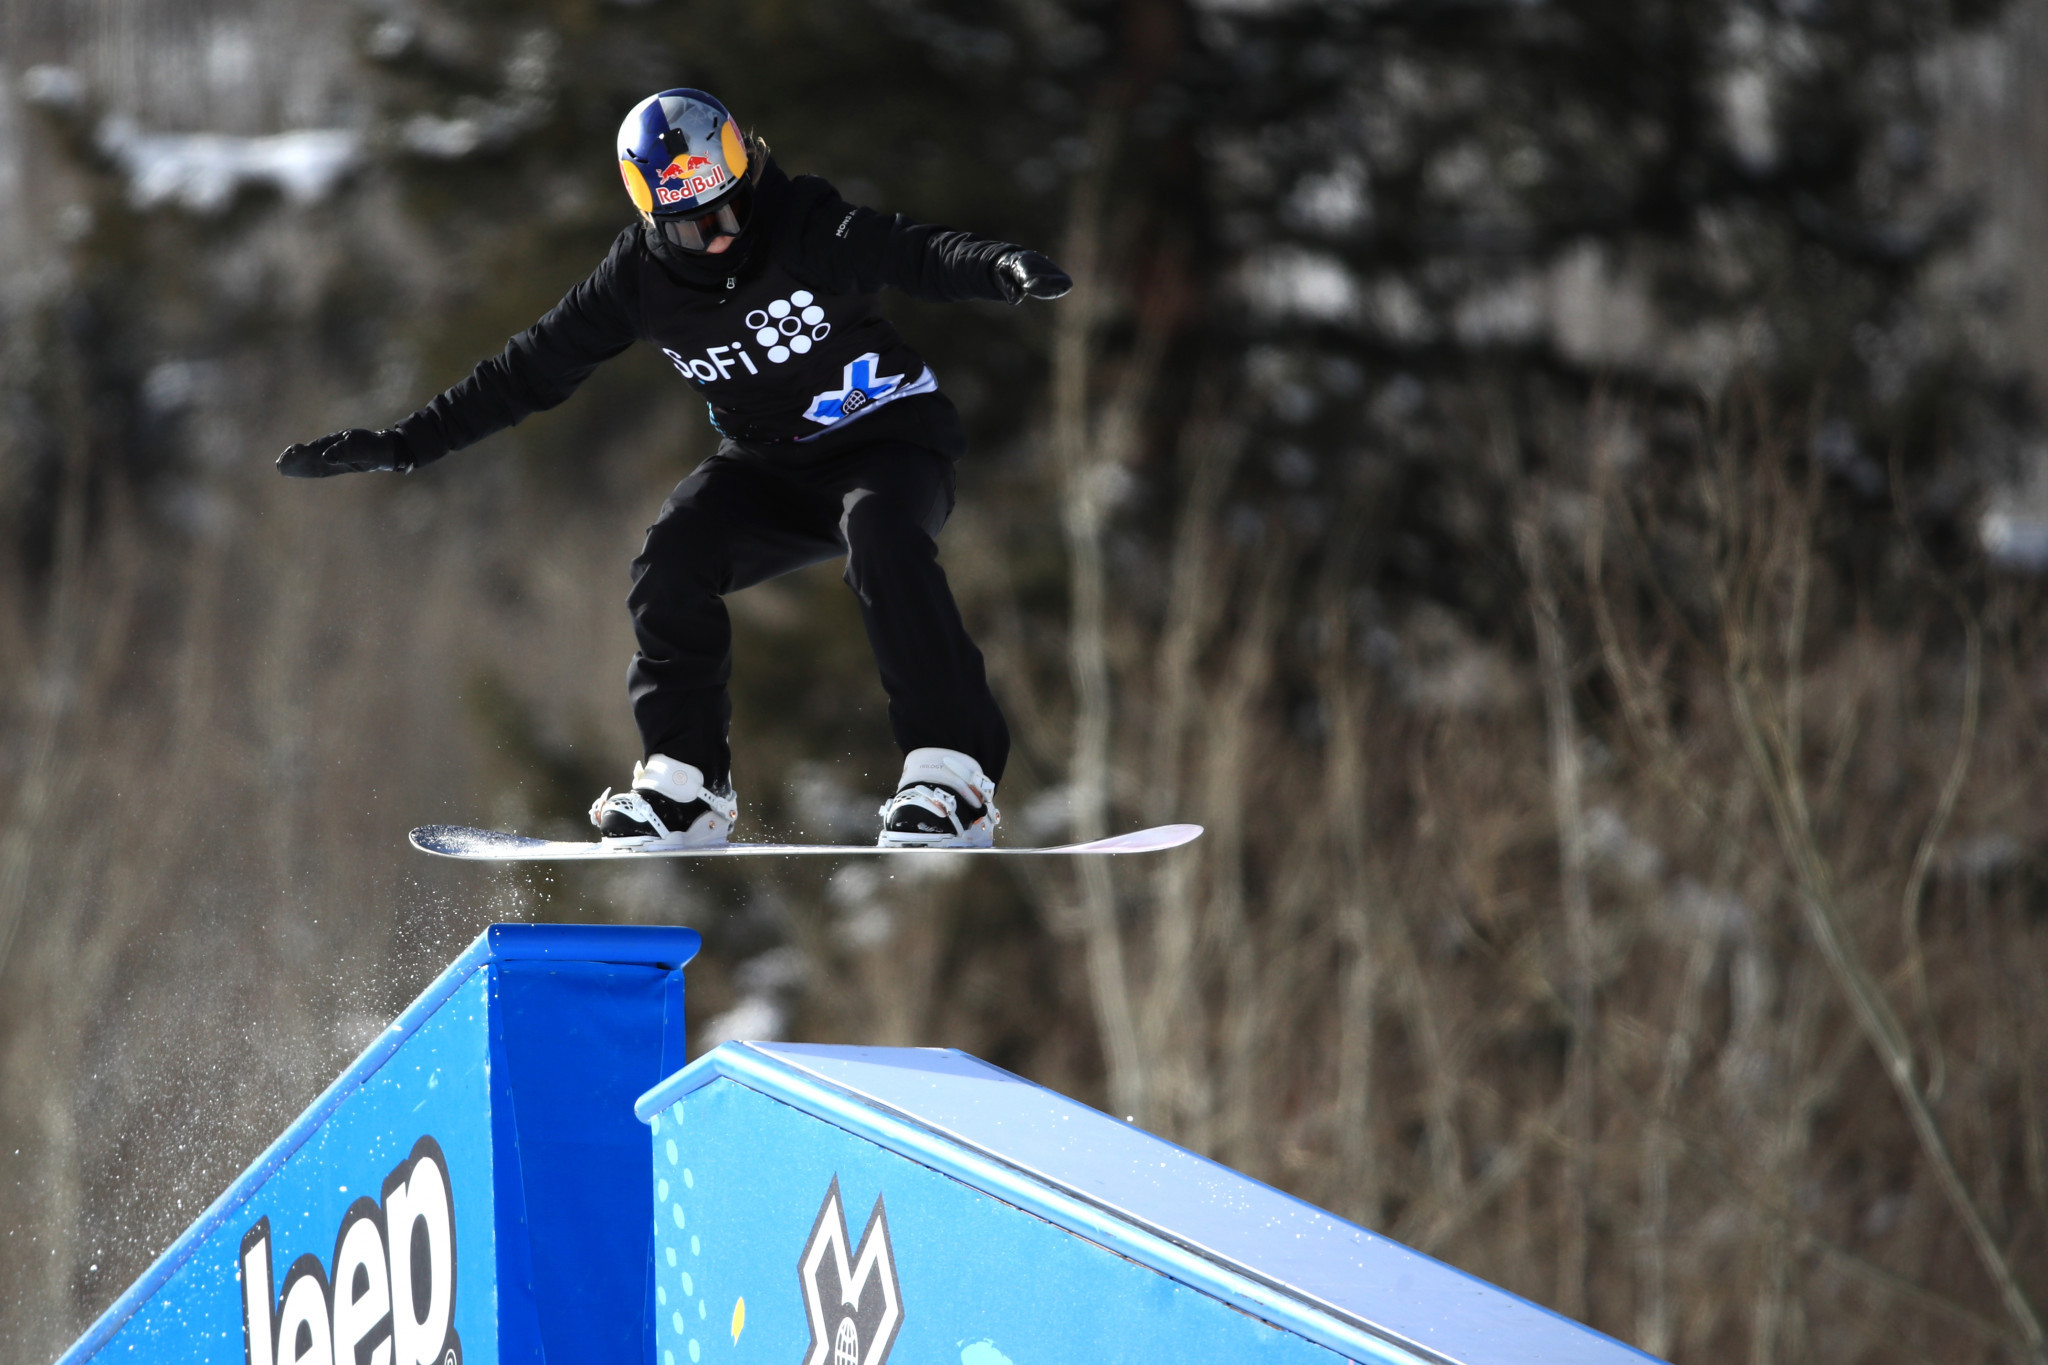 Zoi Sadowski-Synnott topped women's slopestyle qualifying at the FIS Snowboard and Freeski World Championships ©Getty Images